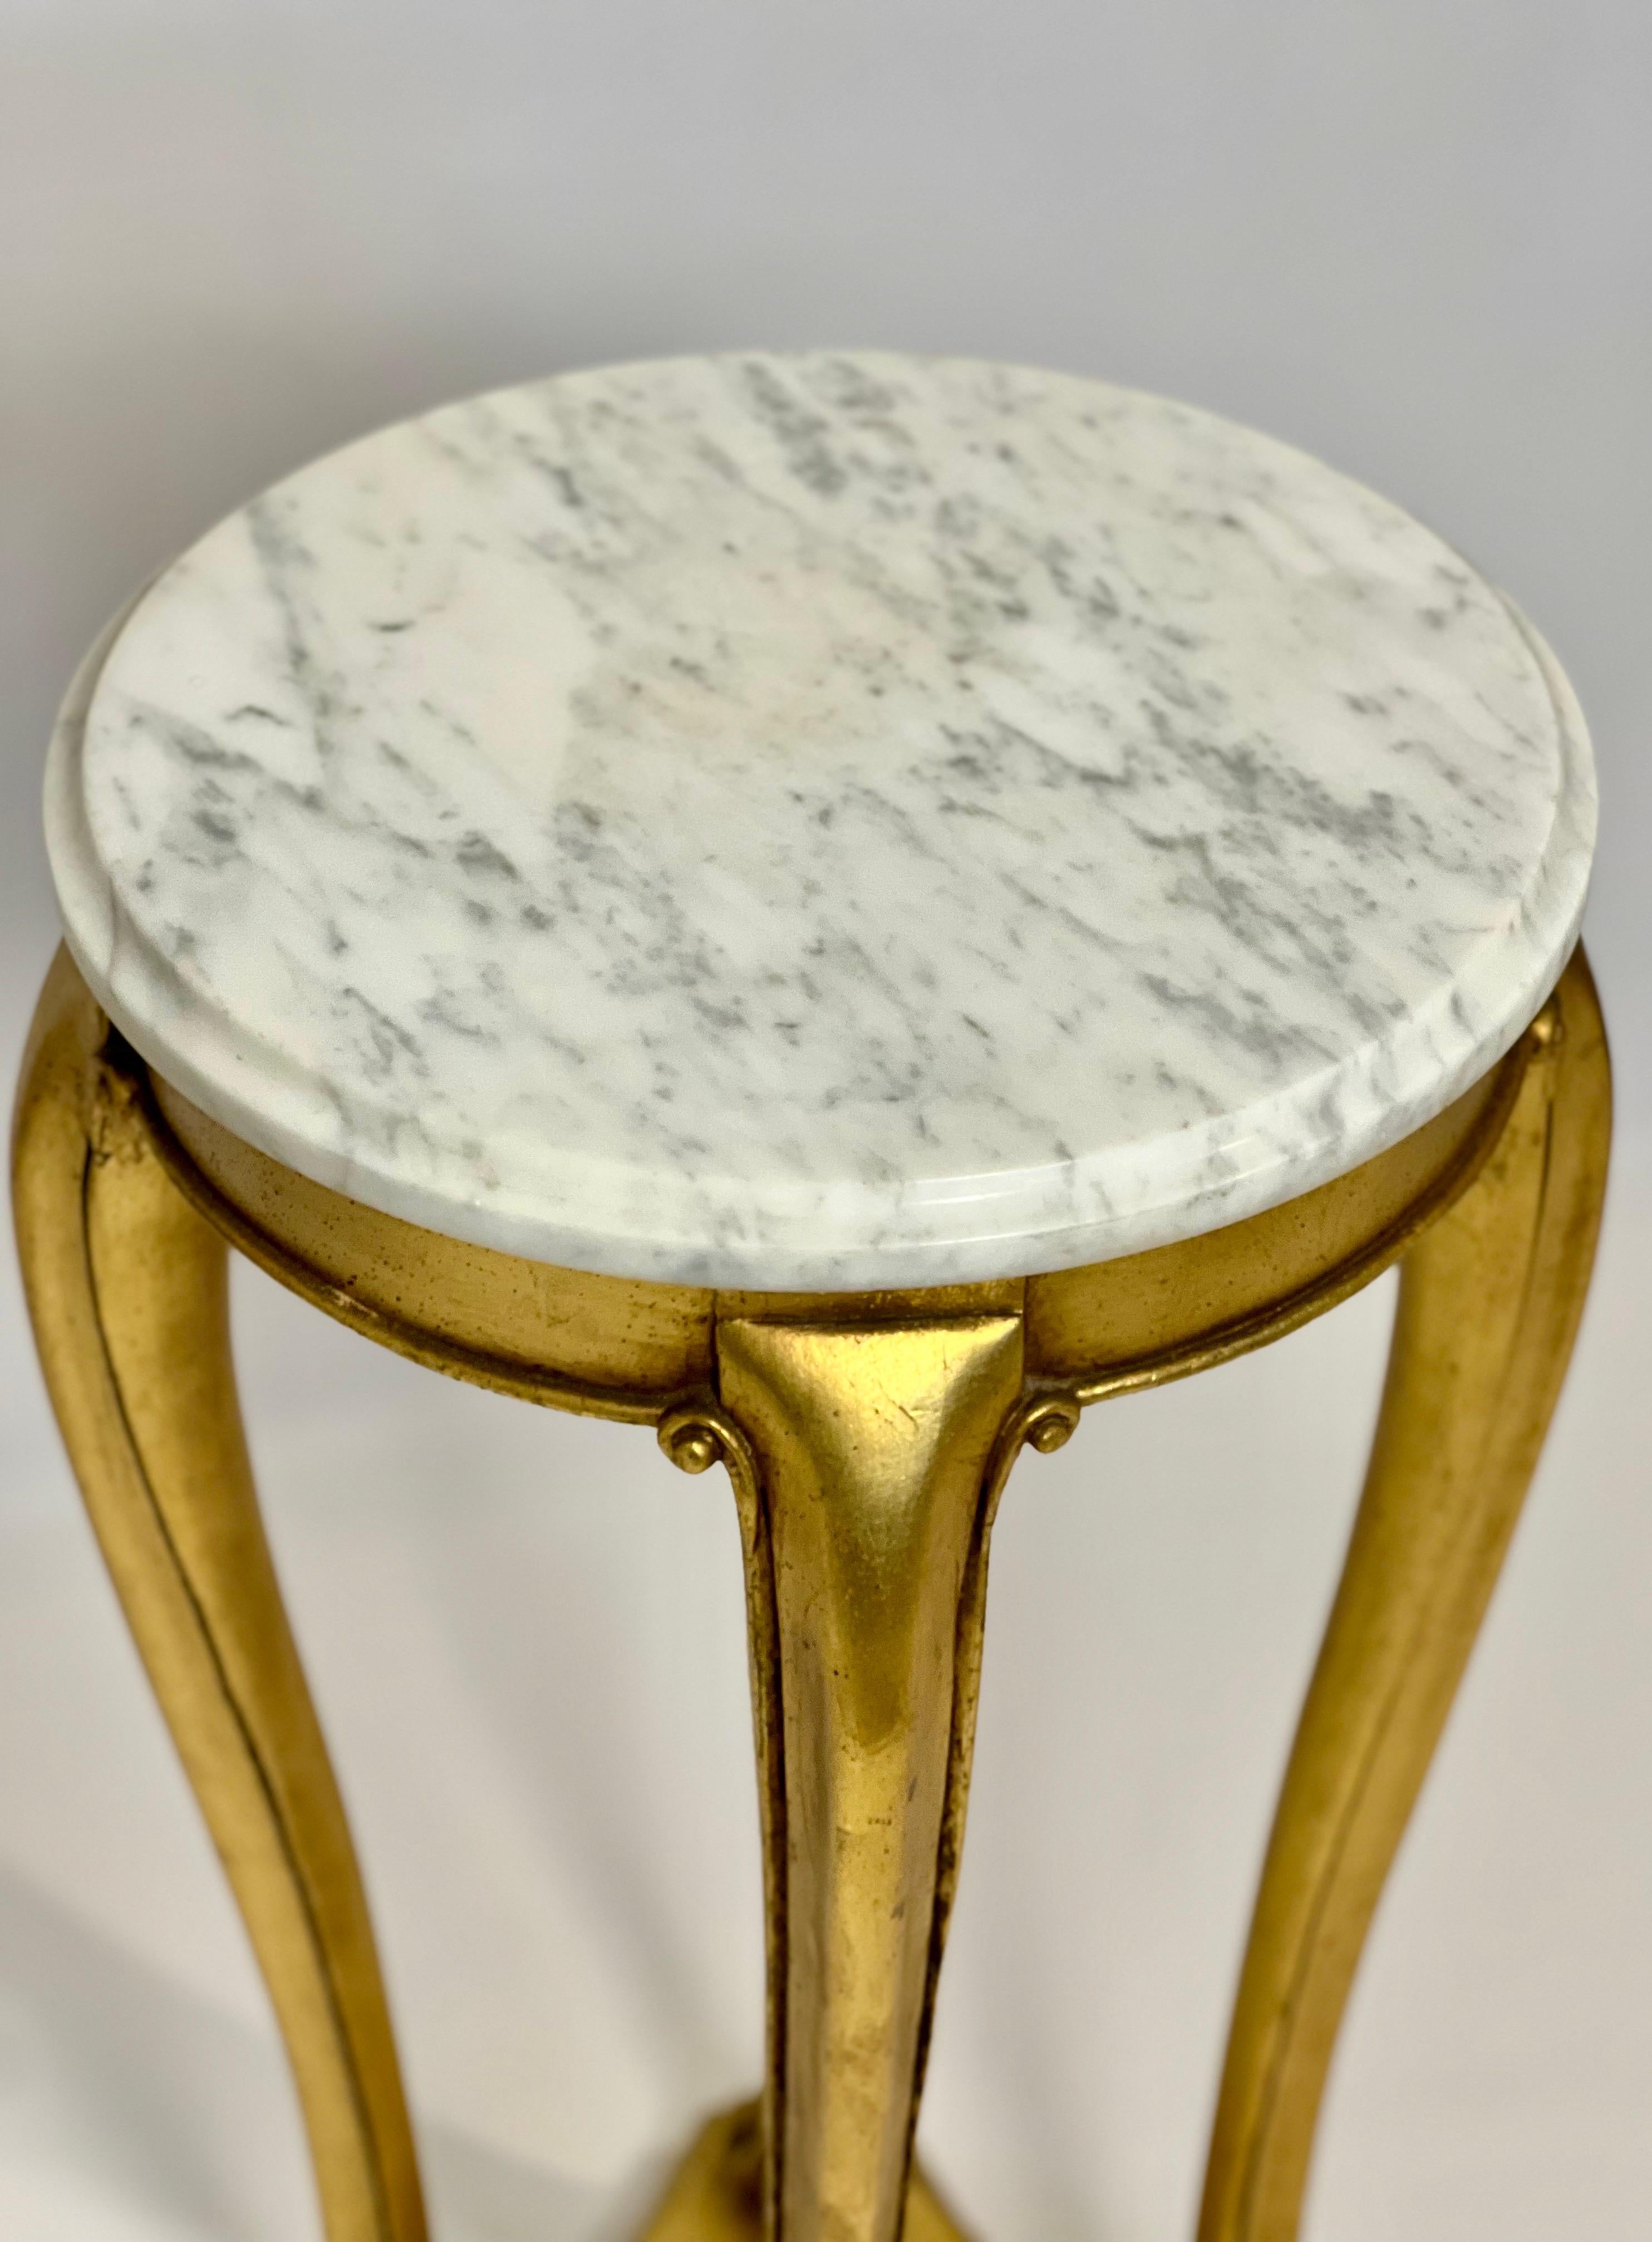 19th Century Regency Style Gilt Wood Marble Top Pedestal or Plant Stand For Sale 2